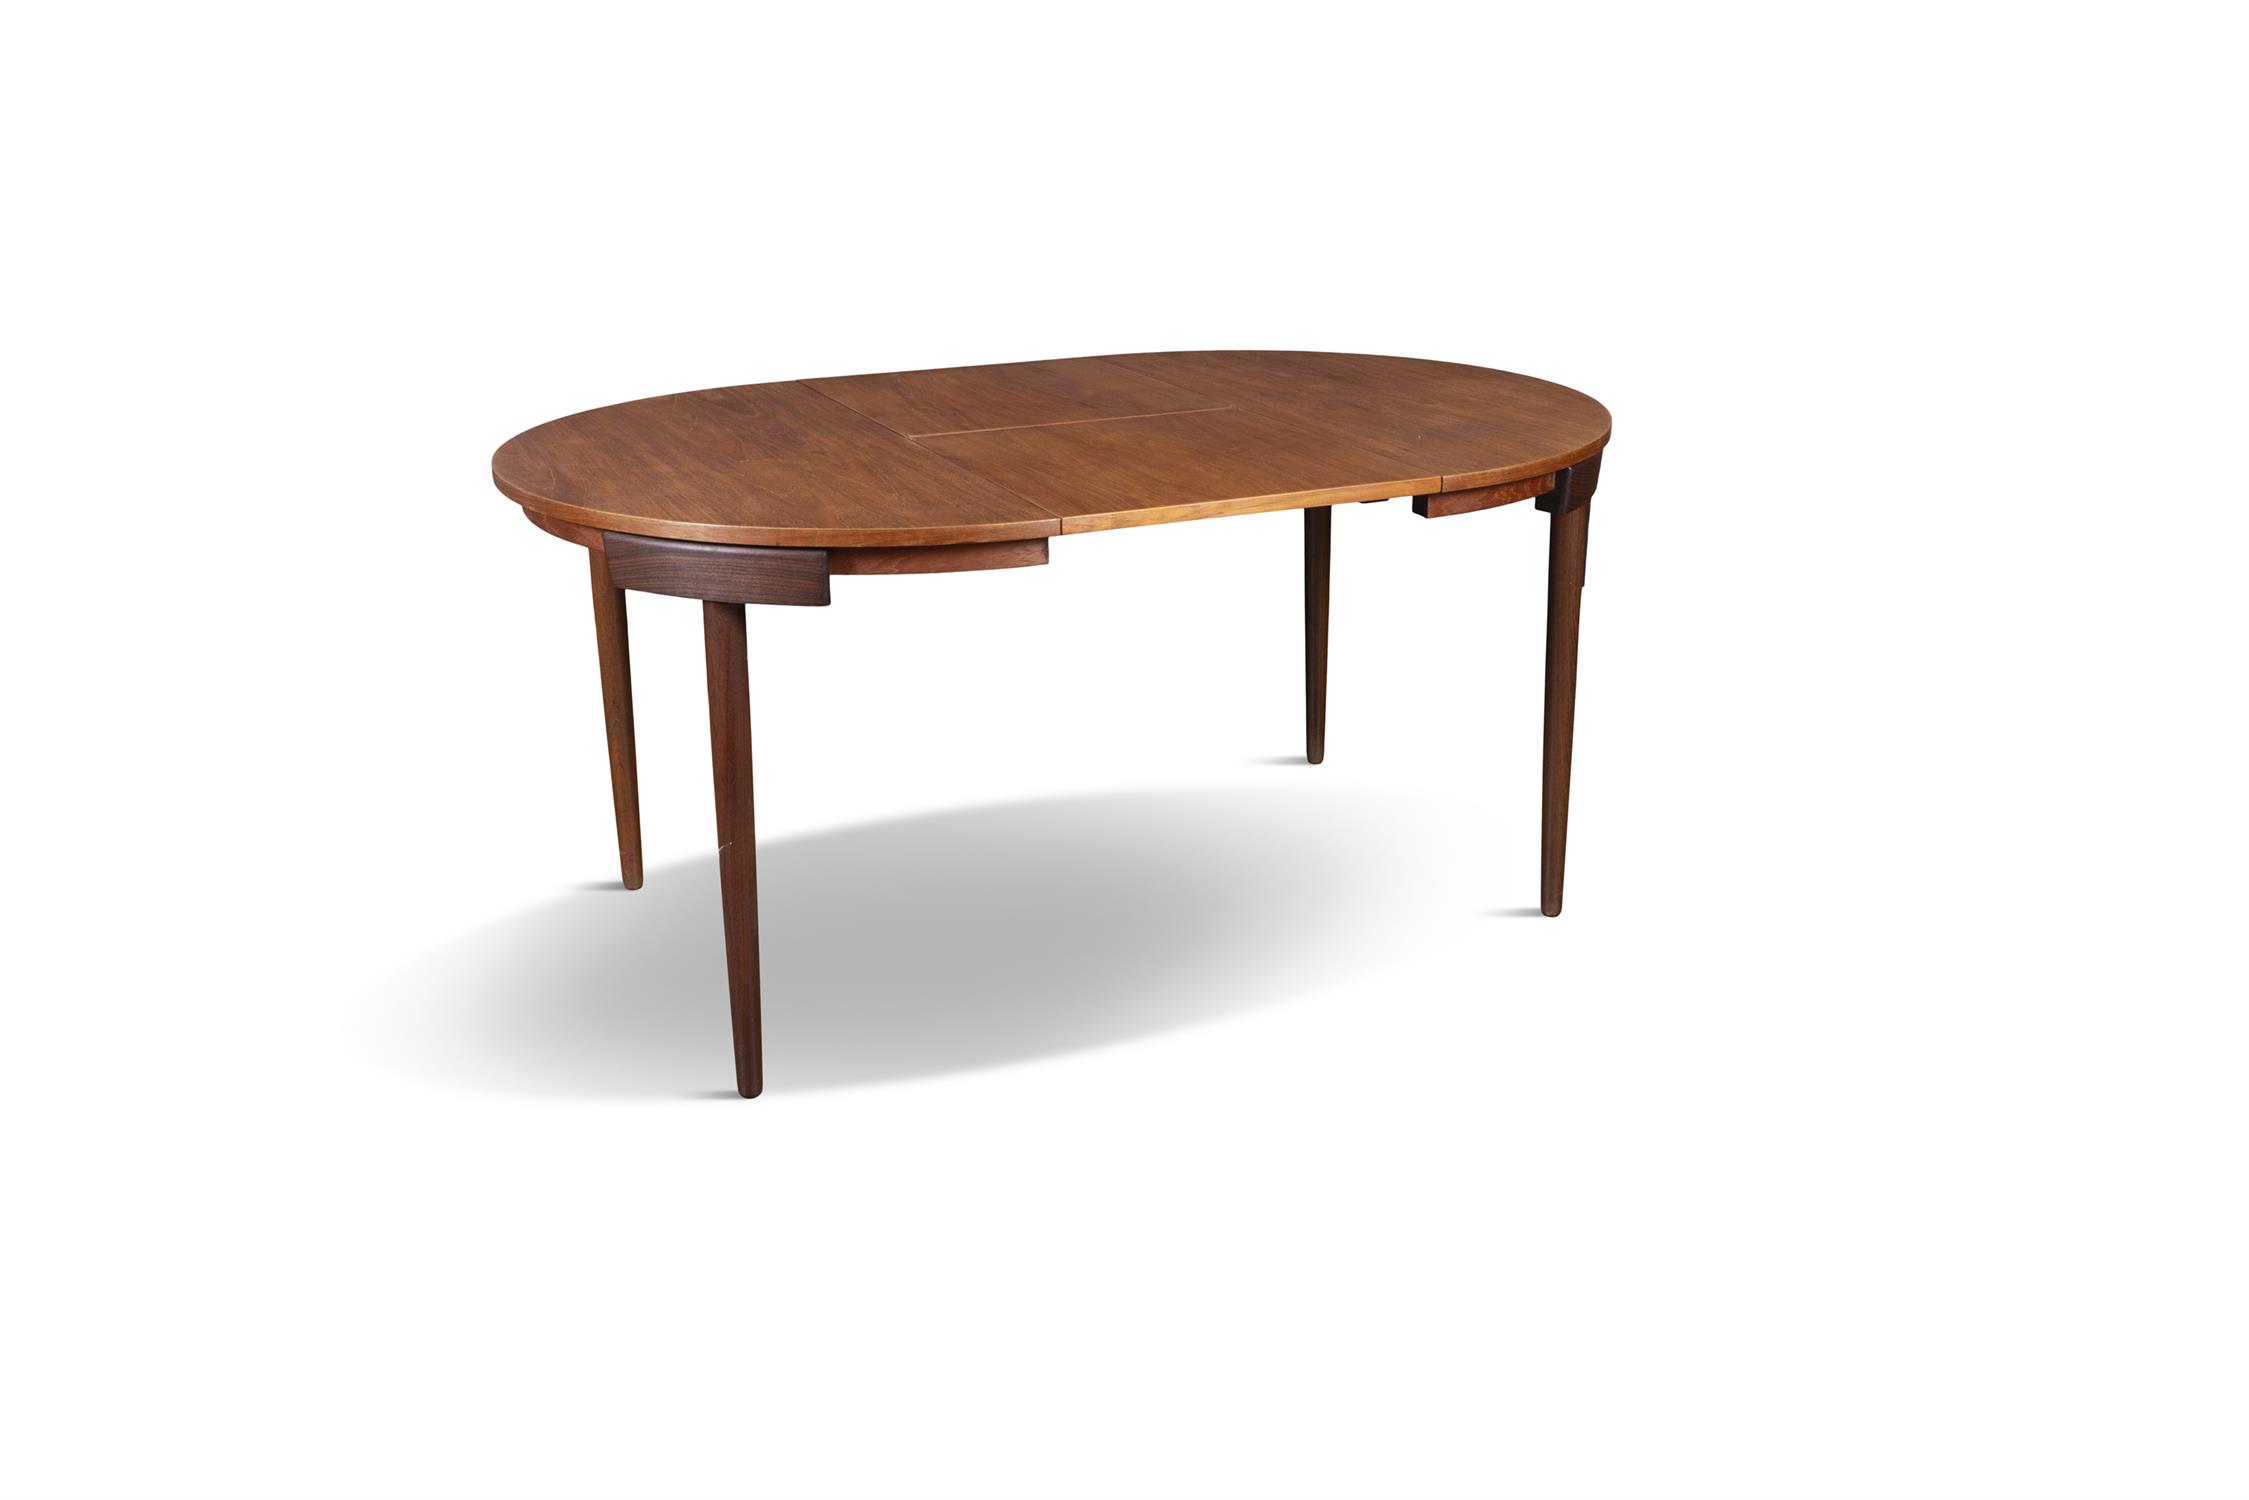 FREM ROJLE A teak circular extending dining table with 4 chairs by Hans Olsen for Frem Rojle. - Image 7 of 9